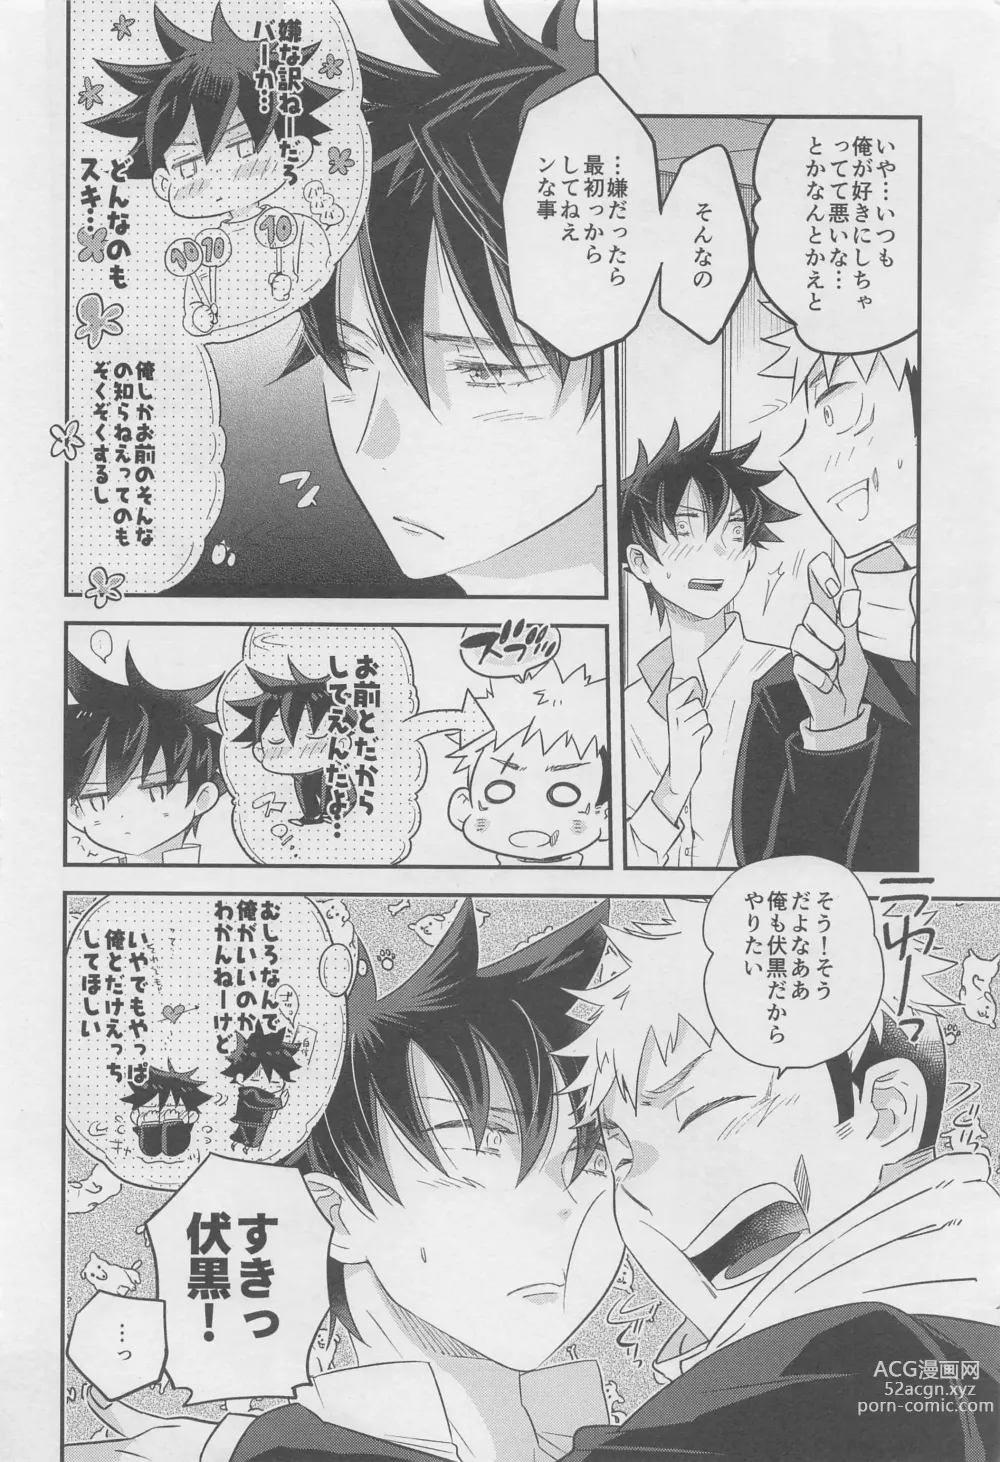 Page 15 of doujinshi Honne  Megane to Kimi to Boku - Will you show me how you really fell about me?